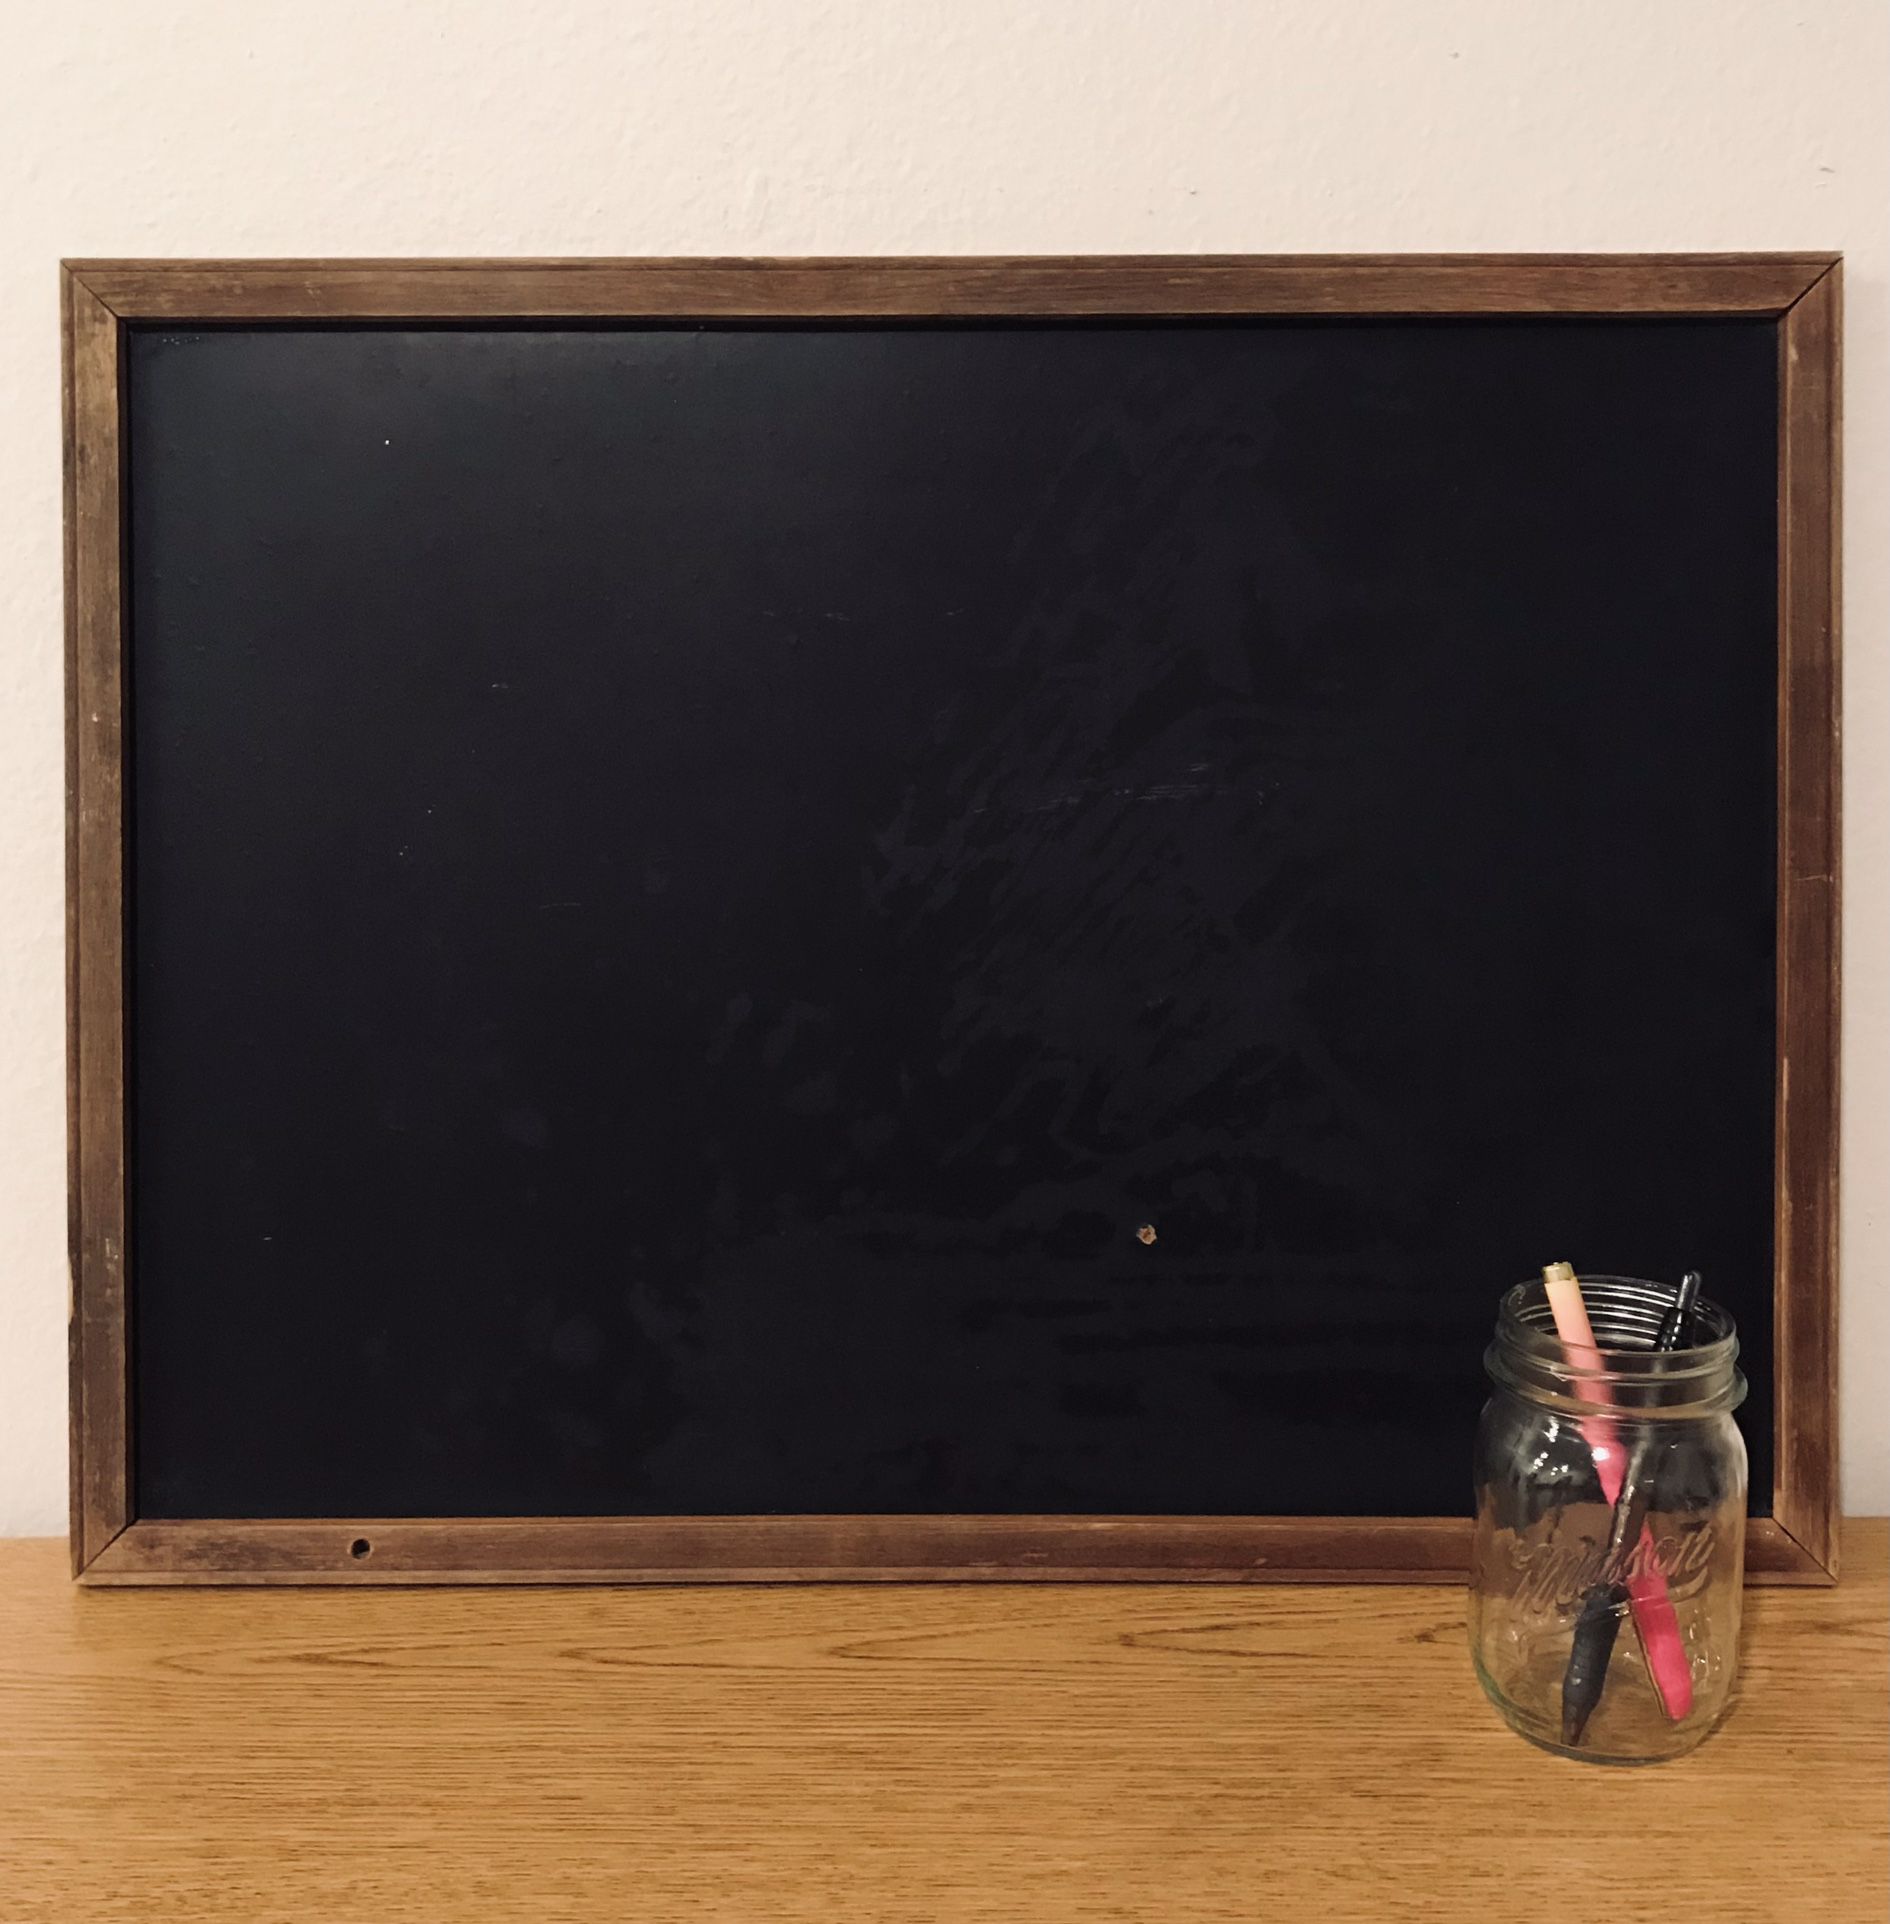 BEAUTIFUL VINTAGE CHALKBOARD WITH WOODEN FRAME